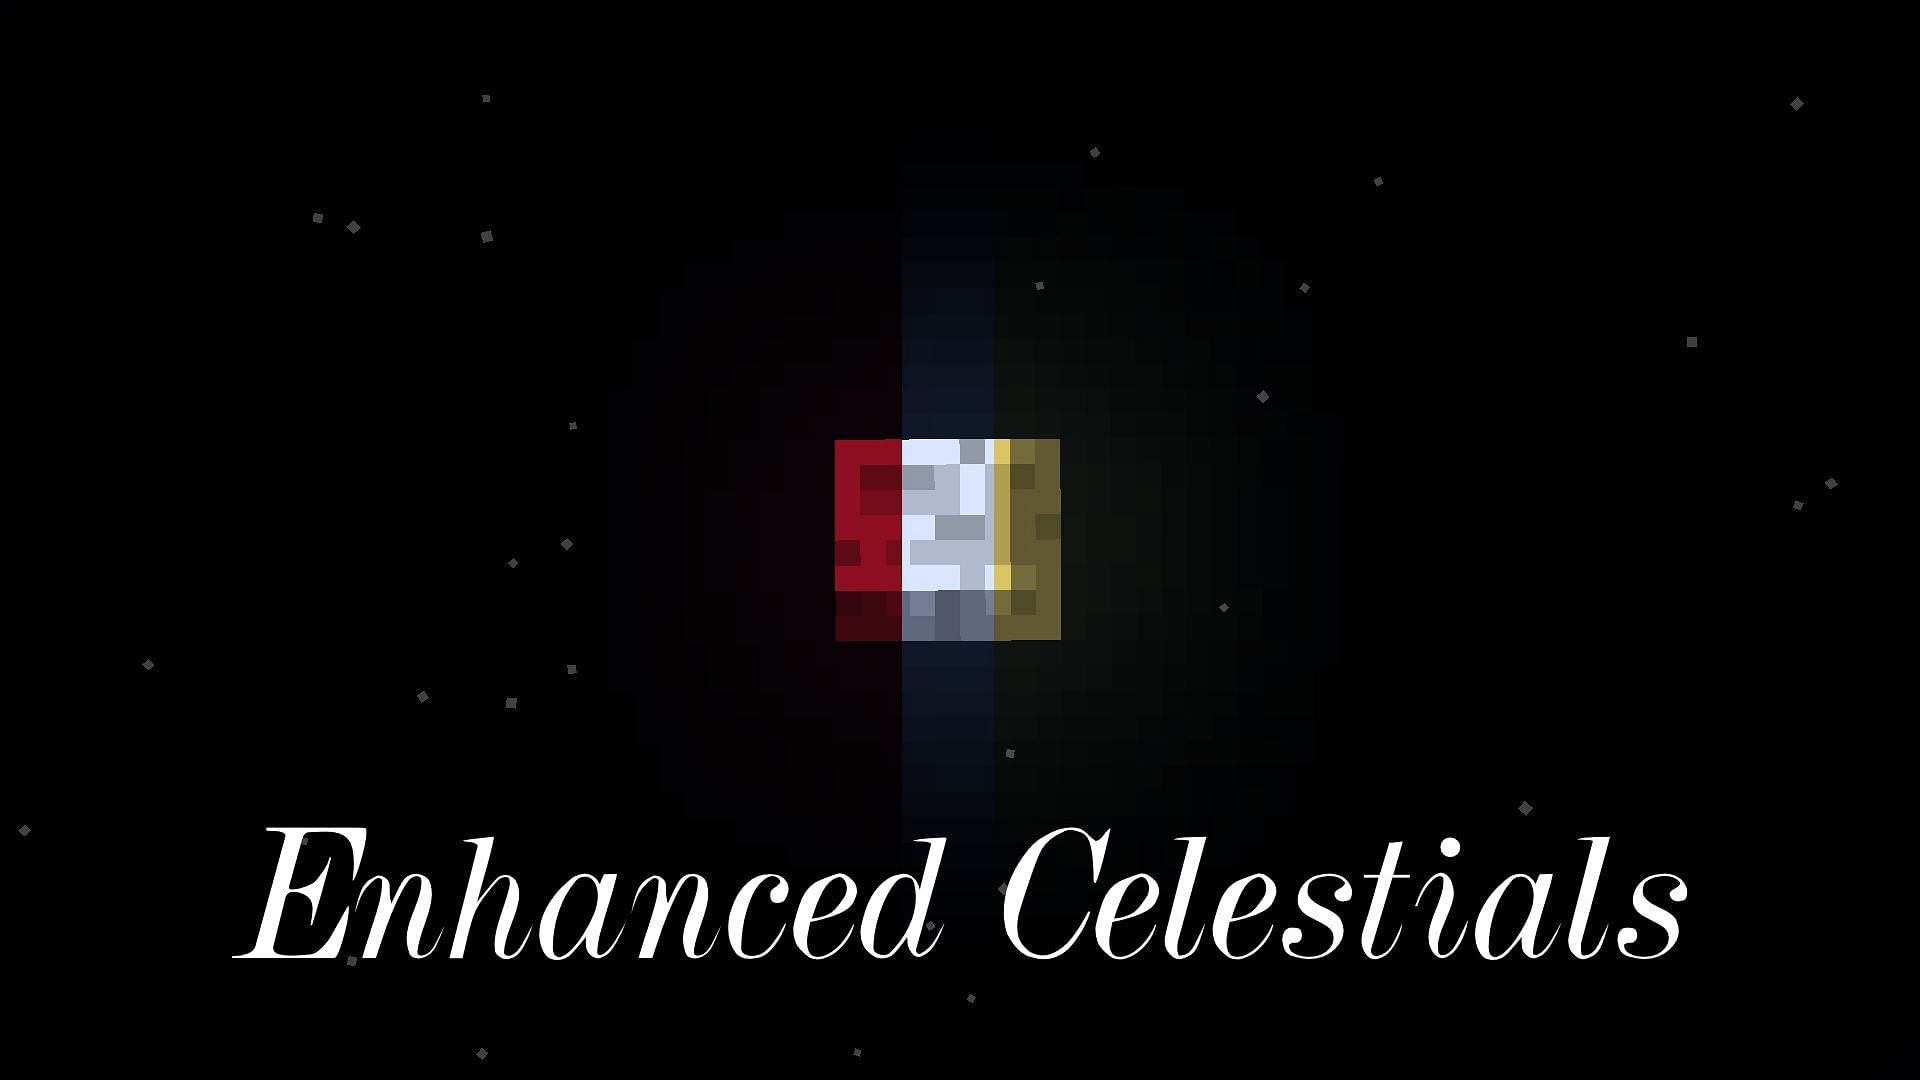 Enhanced Celestials adds three new moon phases, one of which is quite dangerous (Image via Corgi_Taco/CurseForge)